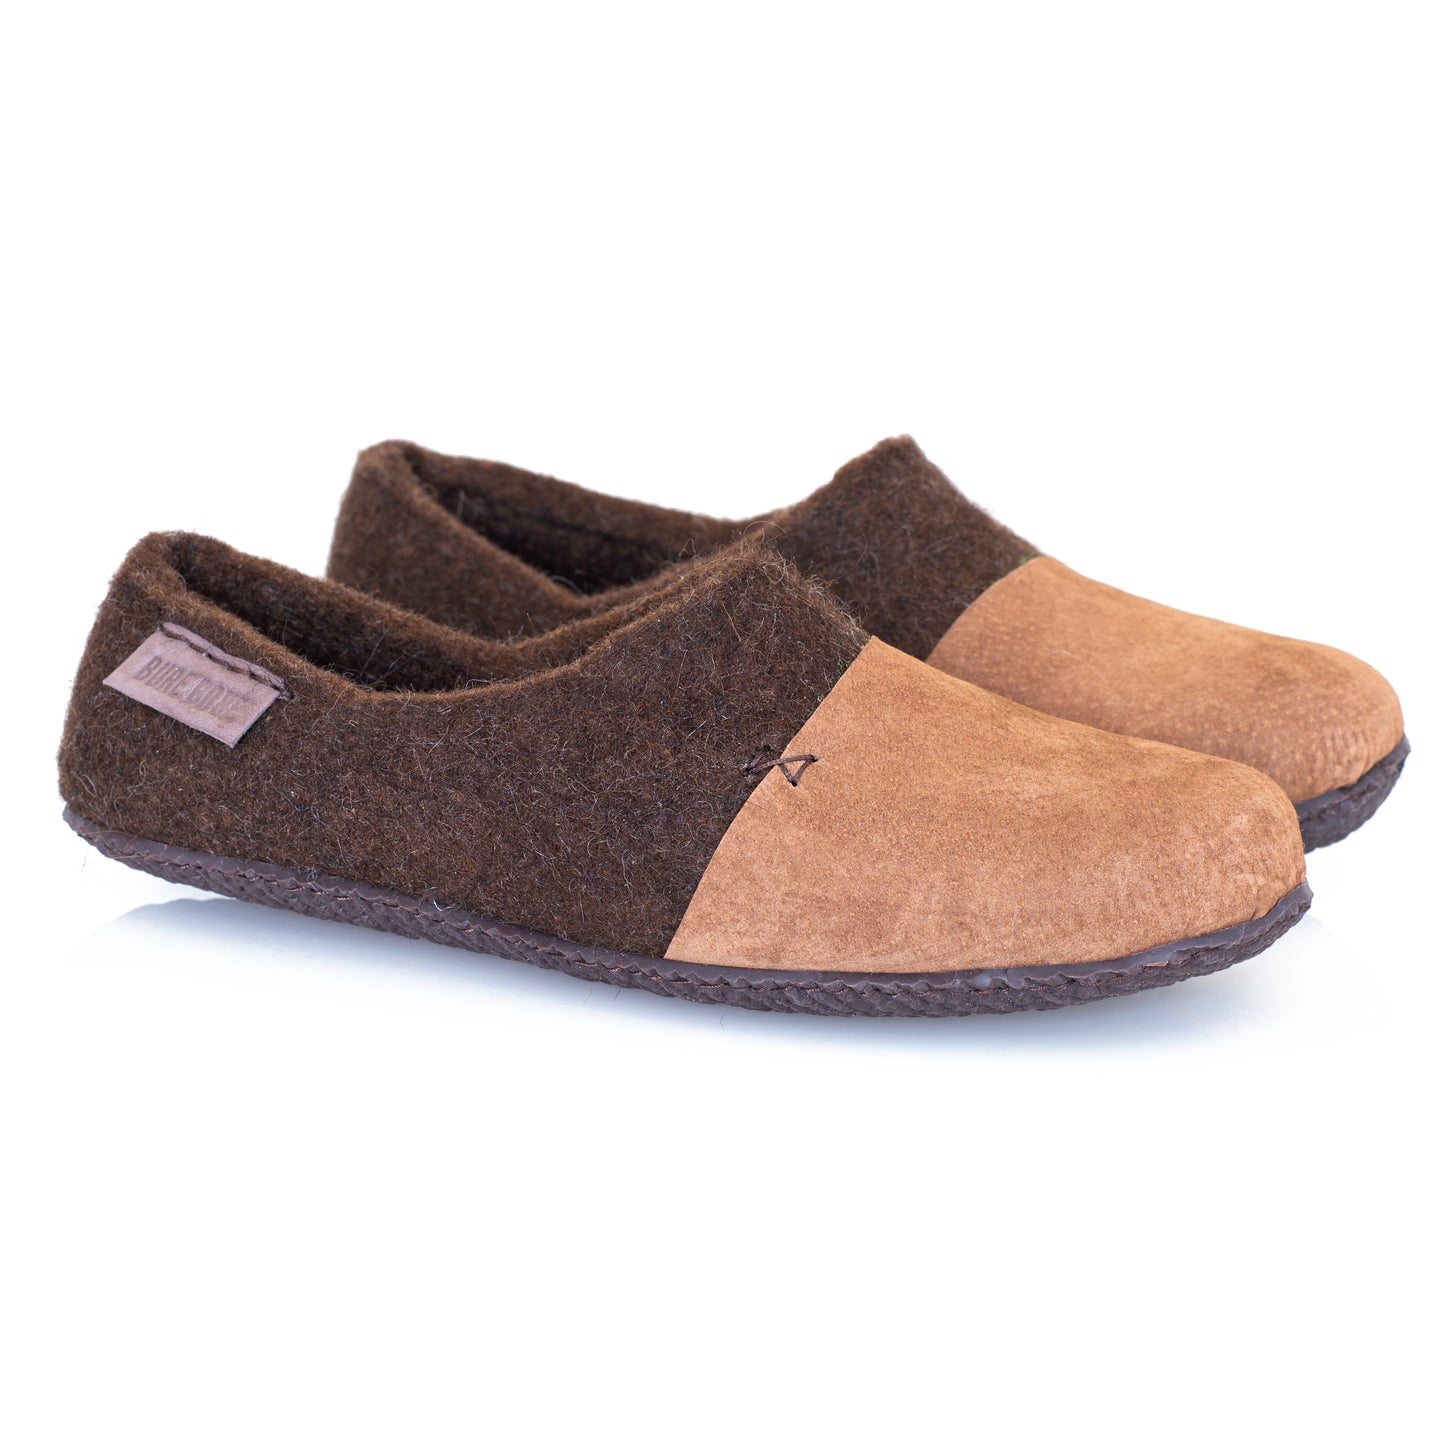 Mens Warm Home Shoes from Wool and Suede with hand-stitched toe caps